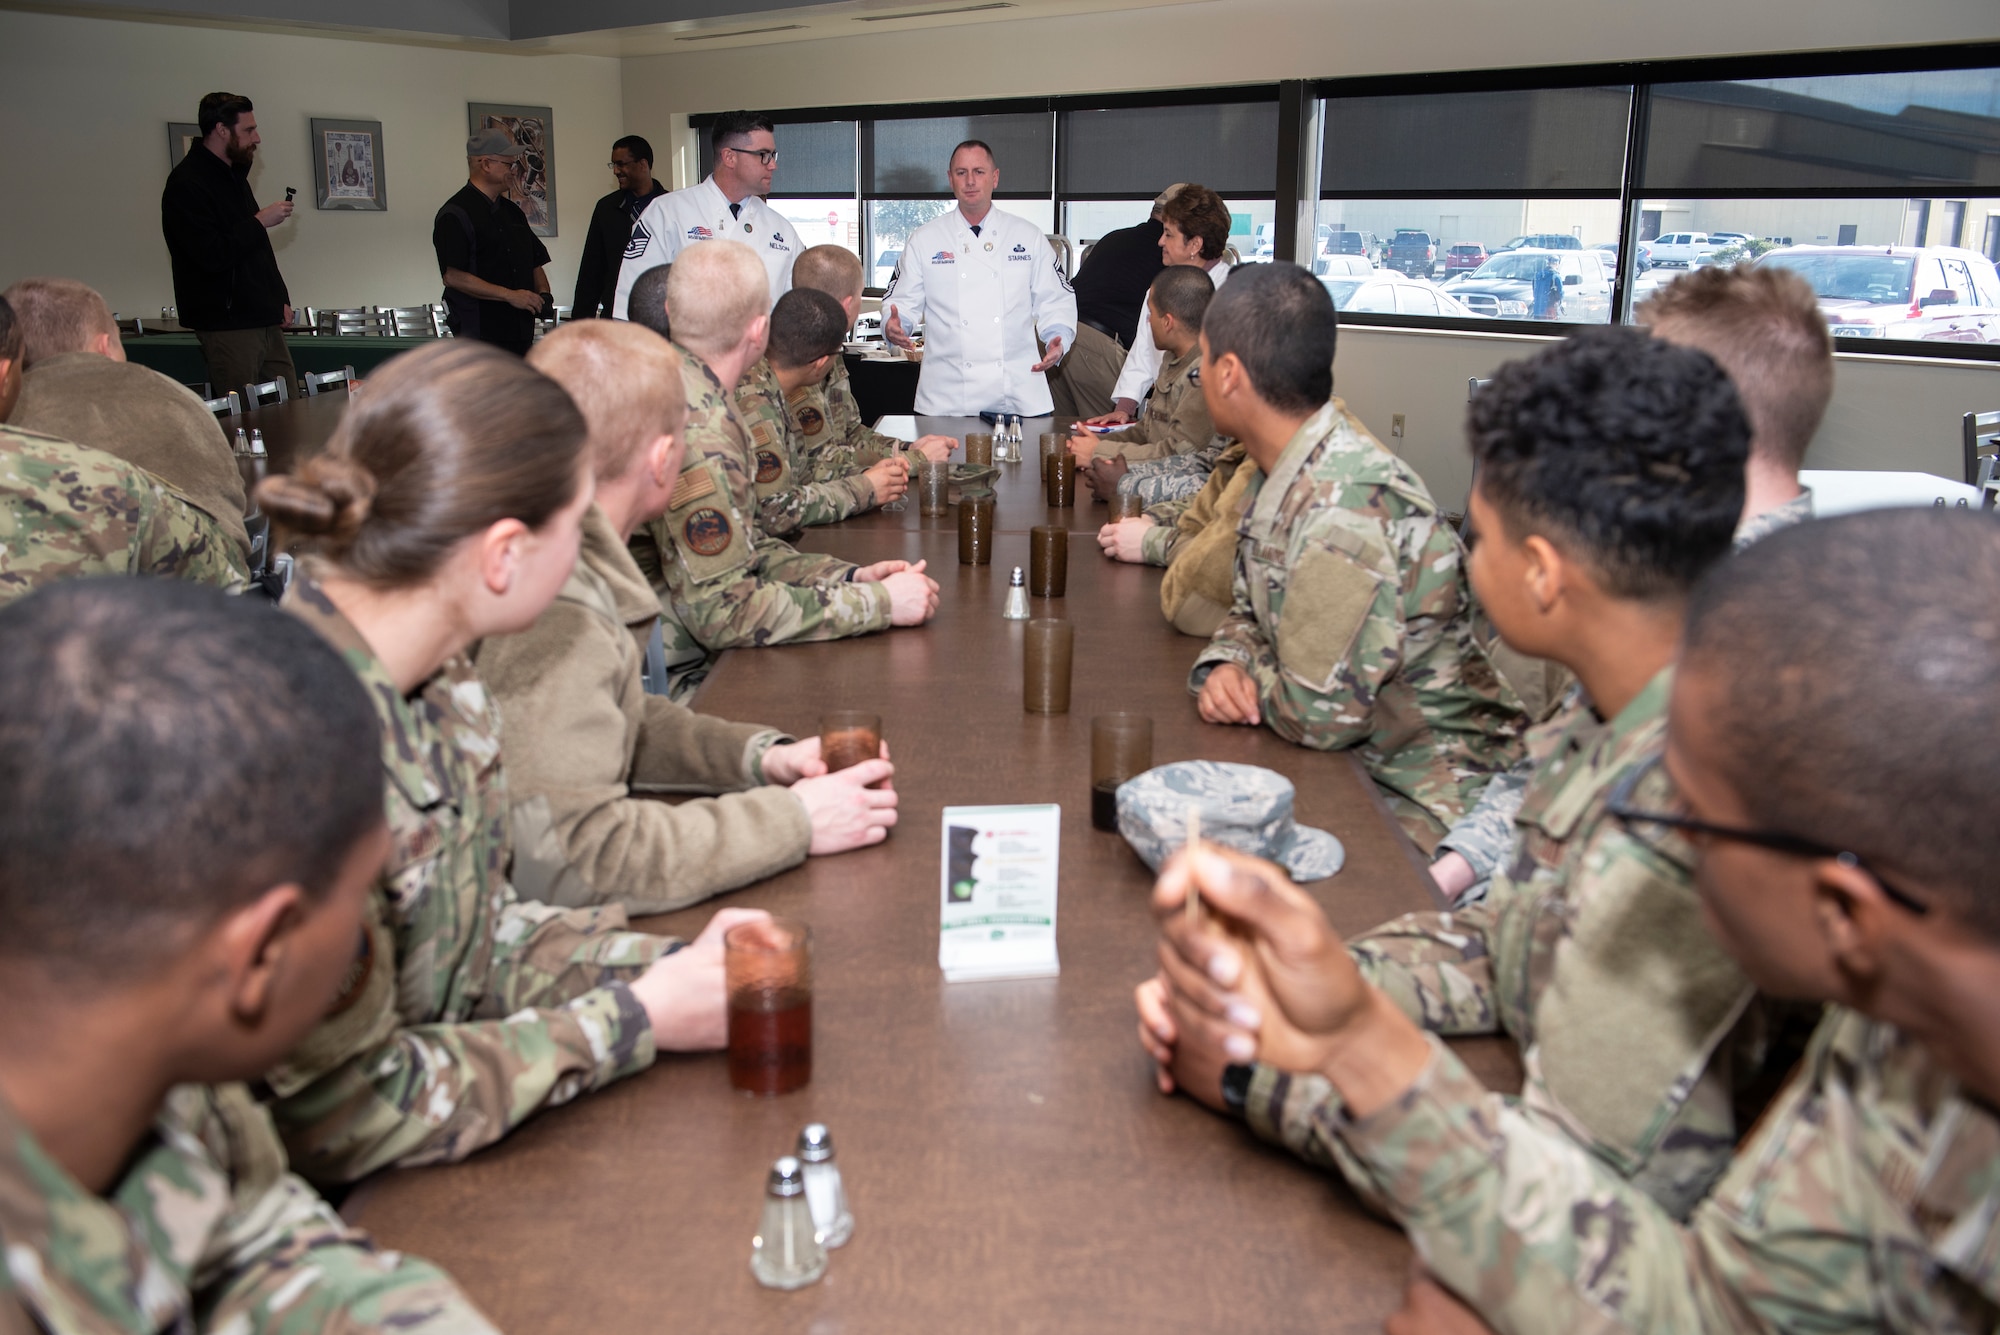 Hennessy Award evaluators talk to Airmen in Training about possible changes in the dining facilities at Sheppard Air force Base, Texas, Feb. 7, 2020. Sheppard has three main dining facilities as well as a central prep kitchen. Sheppard serves around 10,000 people a day, mostly made up of Airmen in Training. (U.S. Air Force photo by Senior Airman Pedro Tenorio)